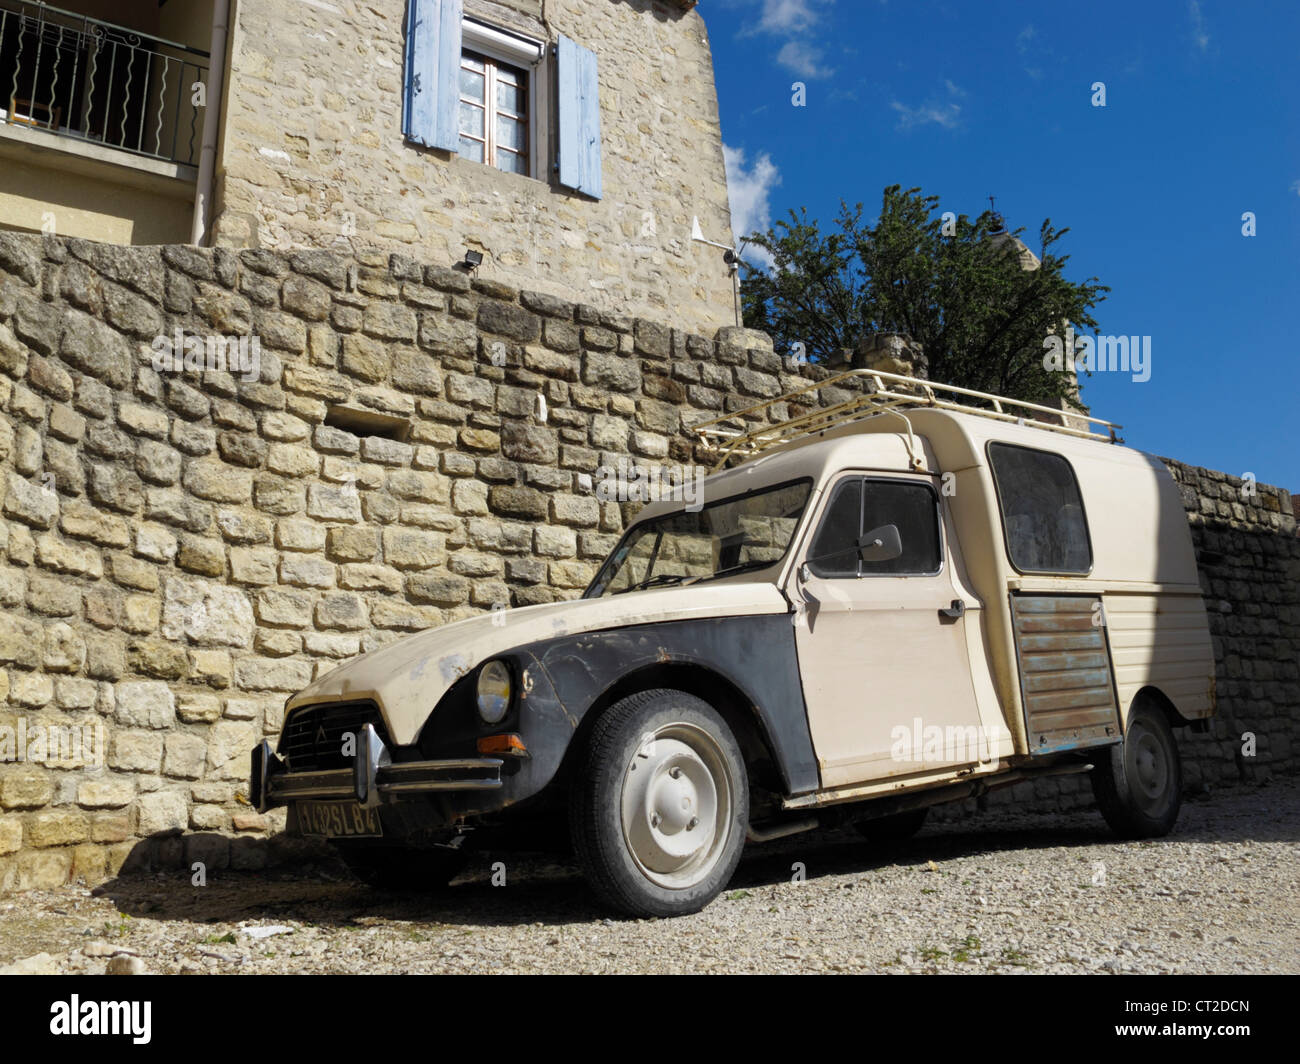 An old and battered Citroën Acadiane van at Mormoiron, Vaucluse, Provence, France. Stock Photo